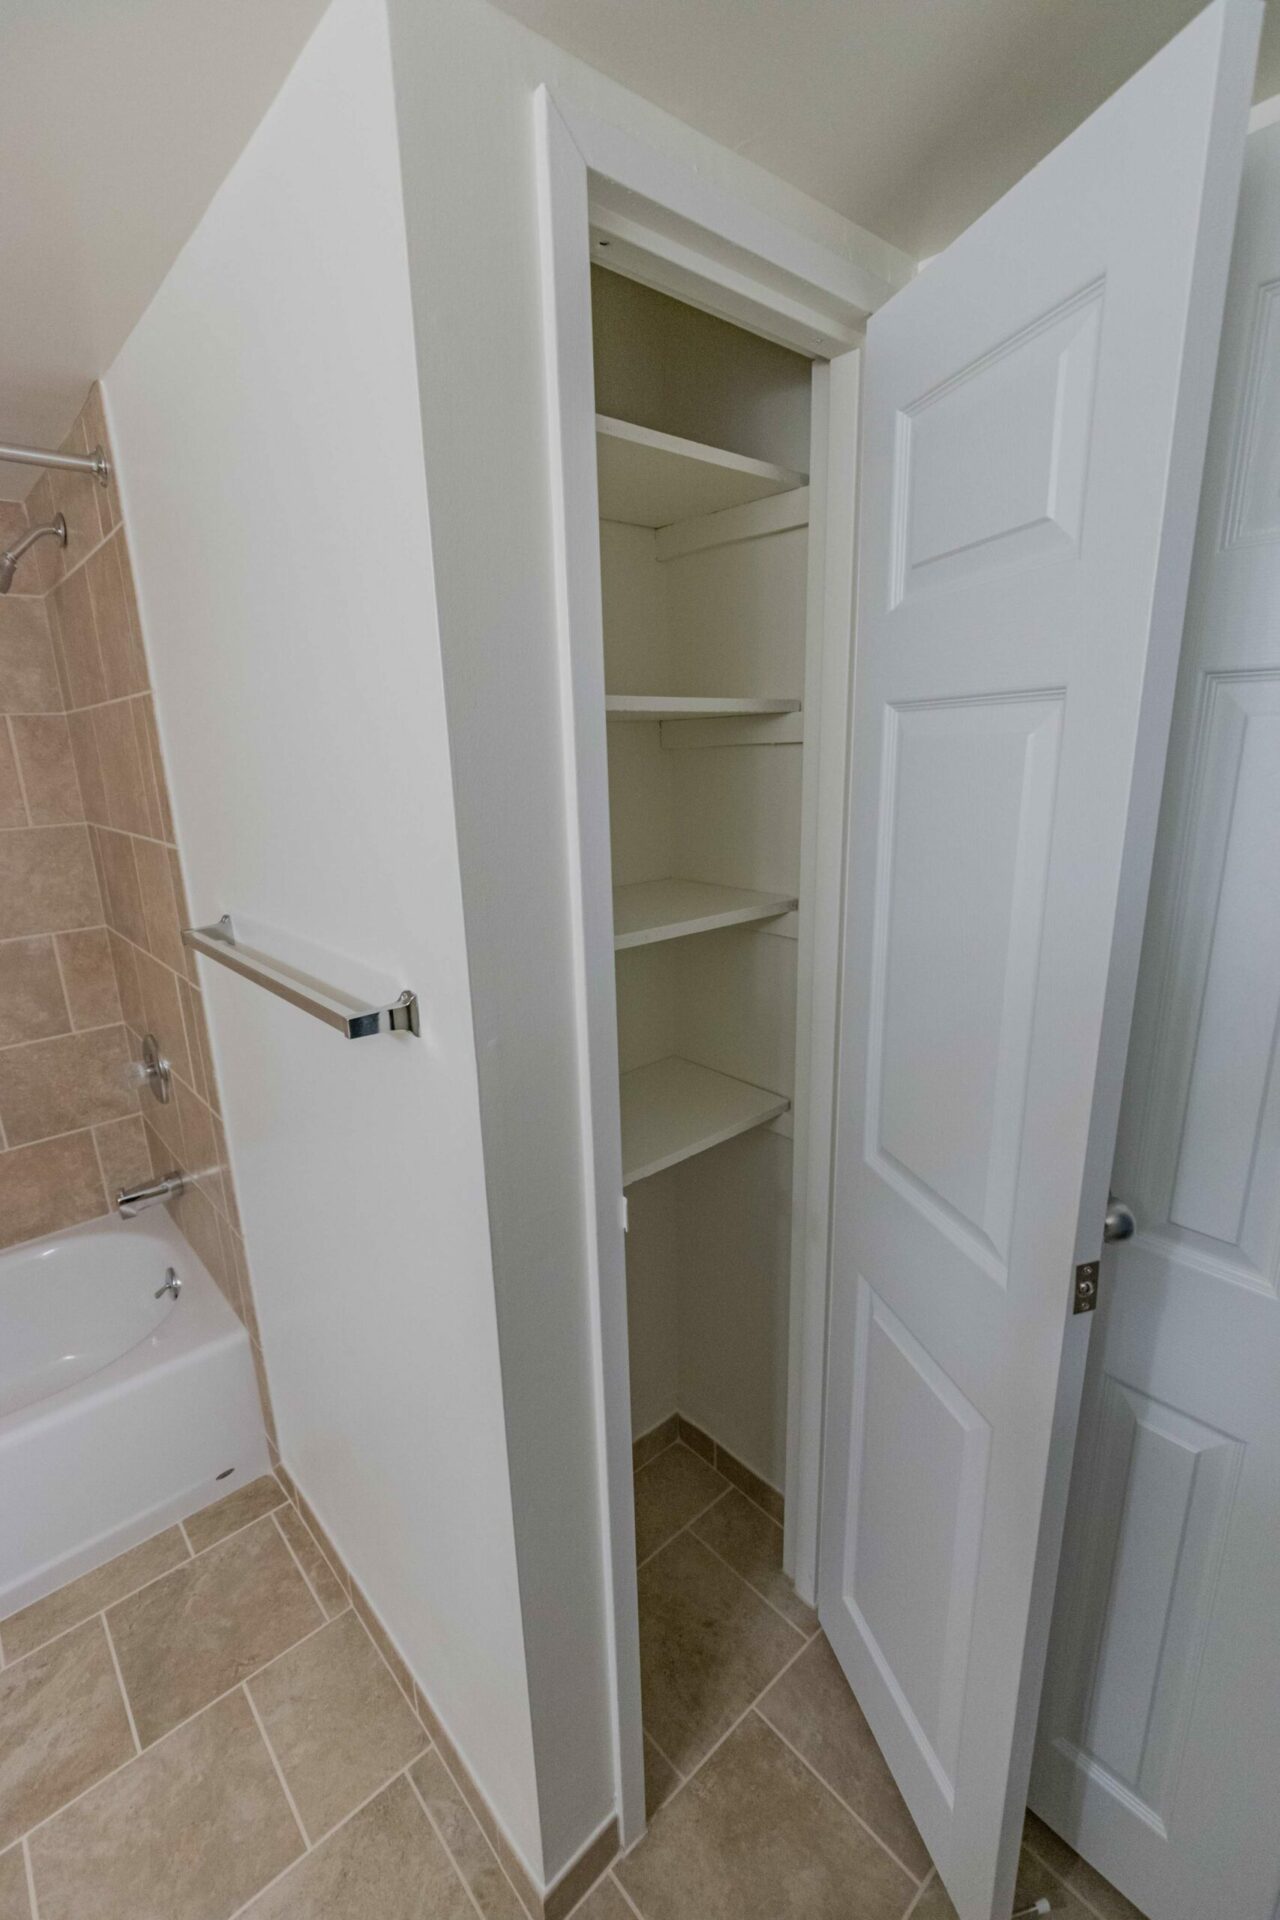 Shelving area in bathroom of an apartment, fitted with various shelves